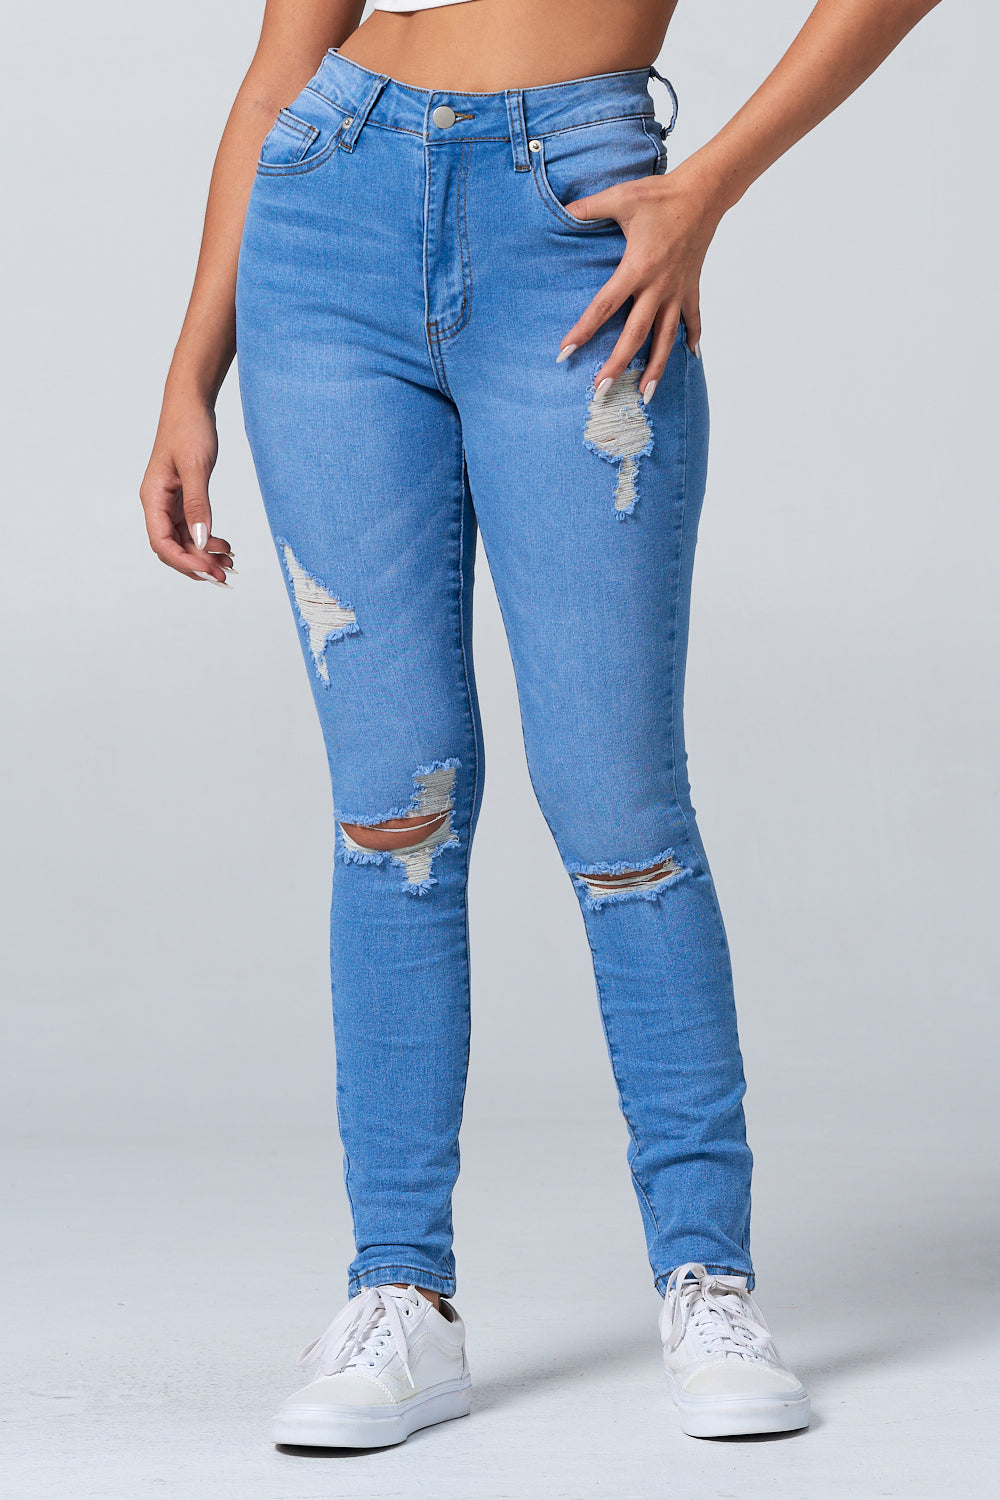 NEW Distressed High Rise Skinny Jean Light Blue YH2213